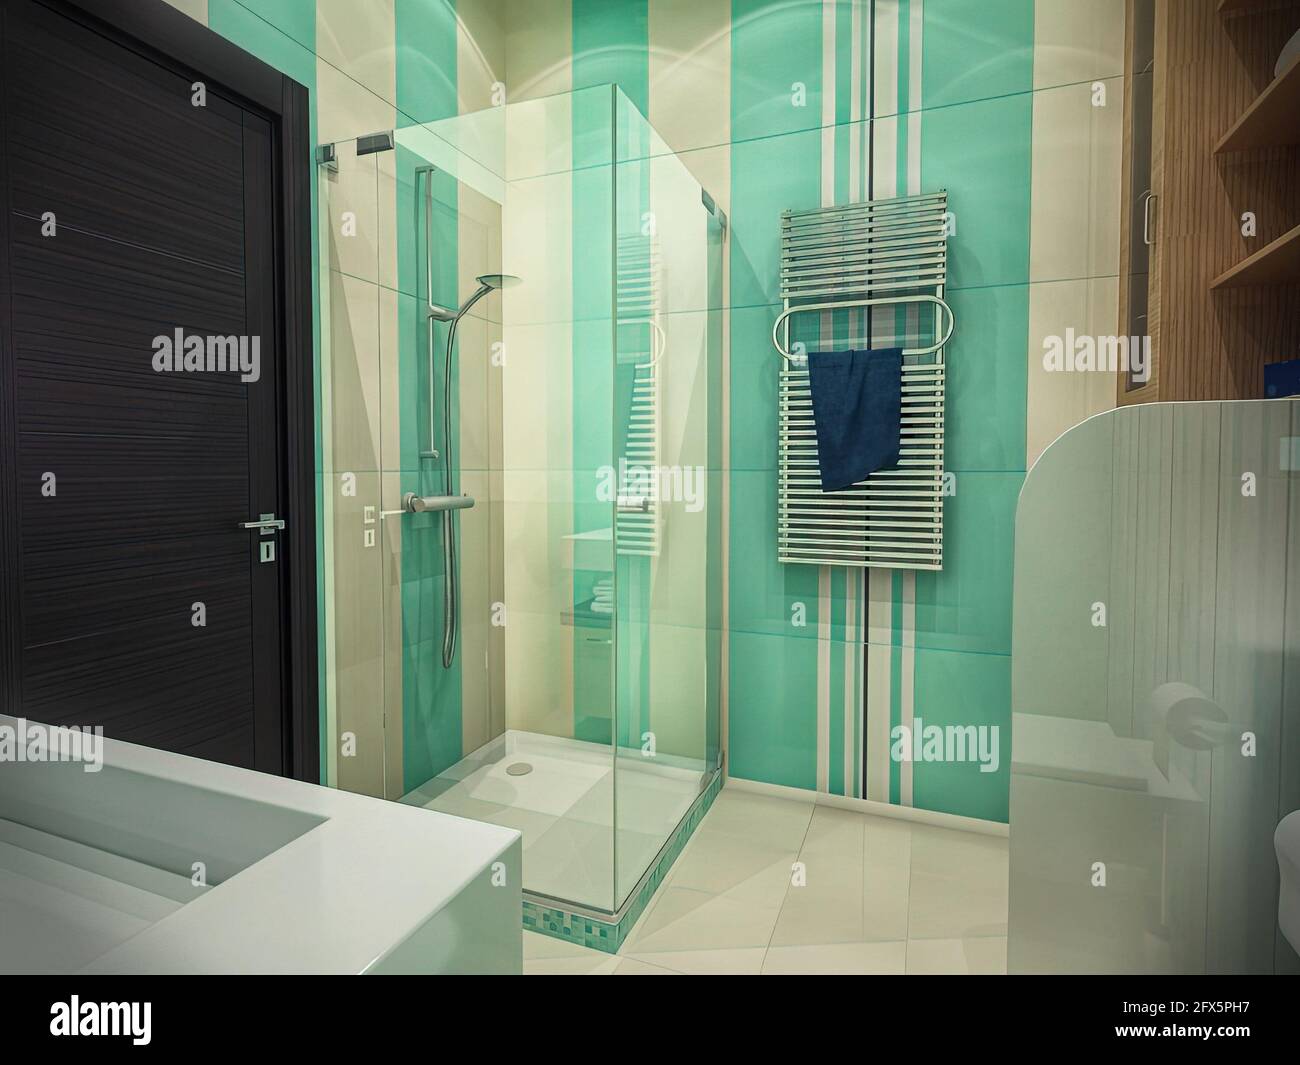 3d illustration of the interior design of a bathroom with a shower. Bathroom concept in mint colors Stock Photo